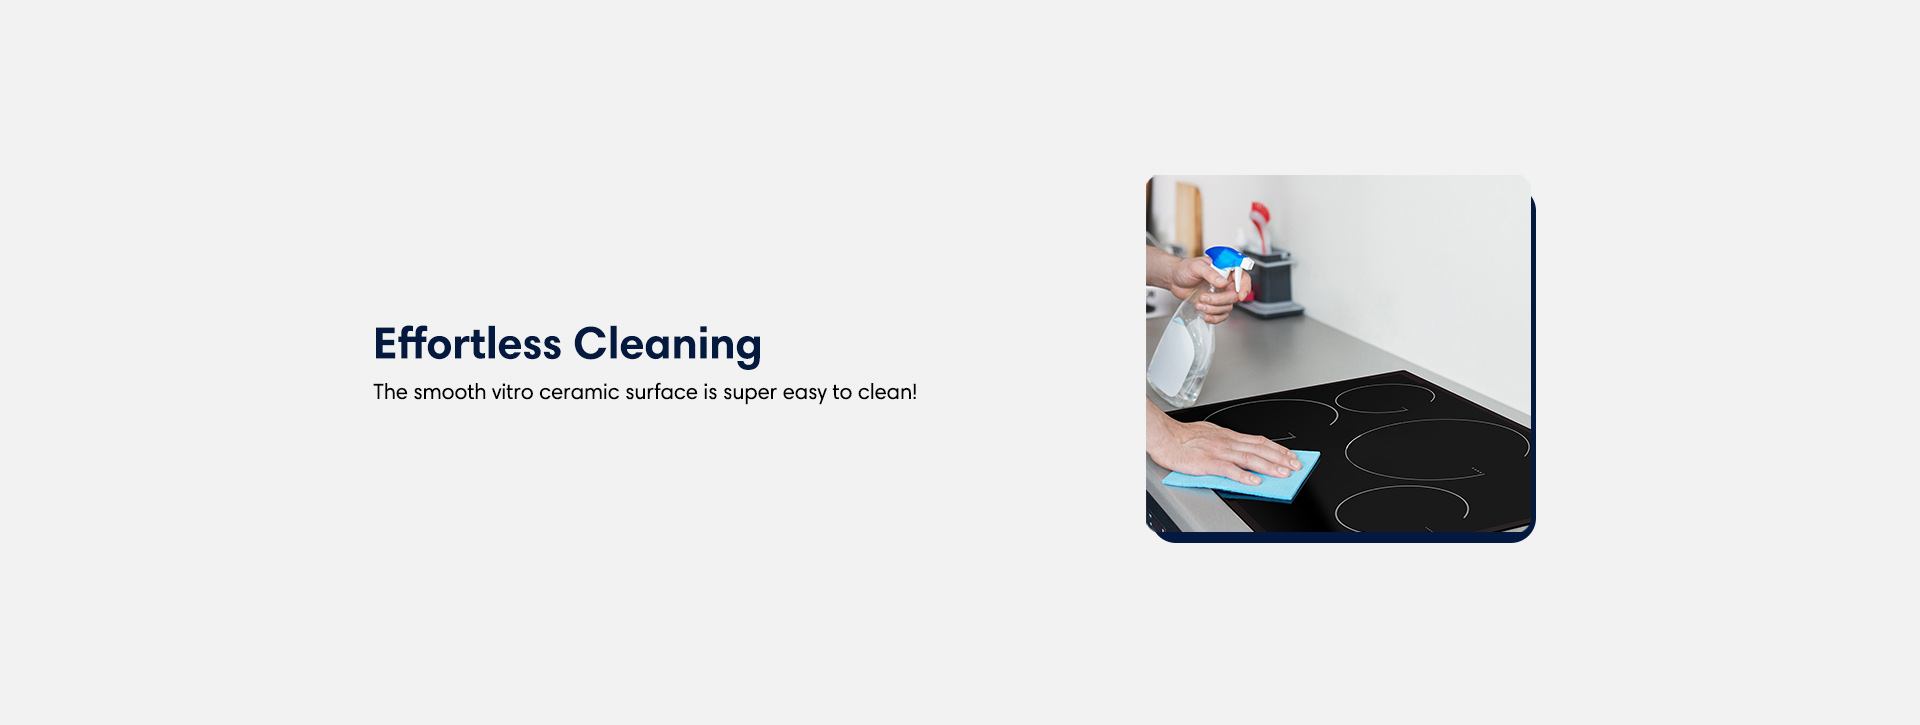 Effortless Cleaning. The smooth vitro ceramic surface is super easy to clean!